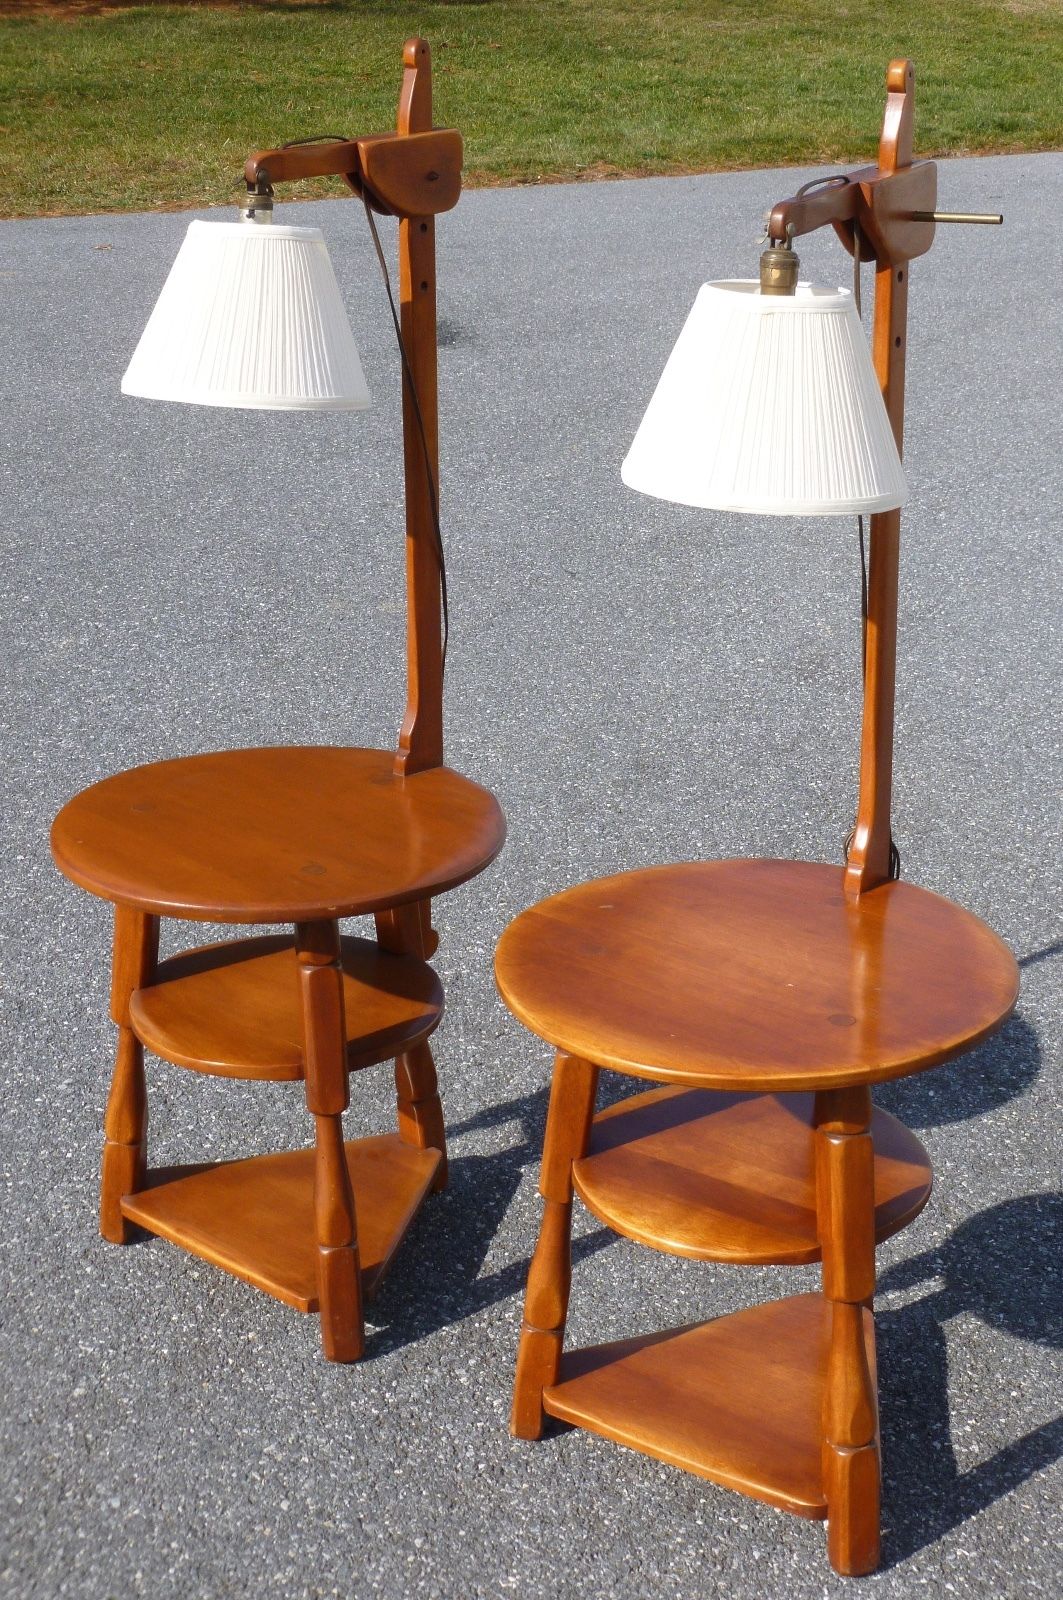 RARE CUSHMAN COLONIAL CREATIONS MAPLE END TABLE w/ ATTACHED LAMP - TAKE